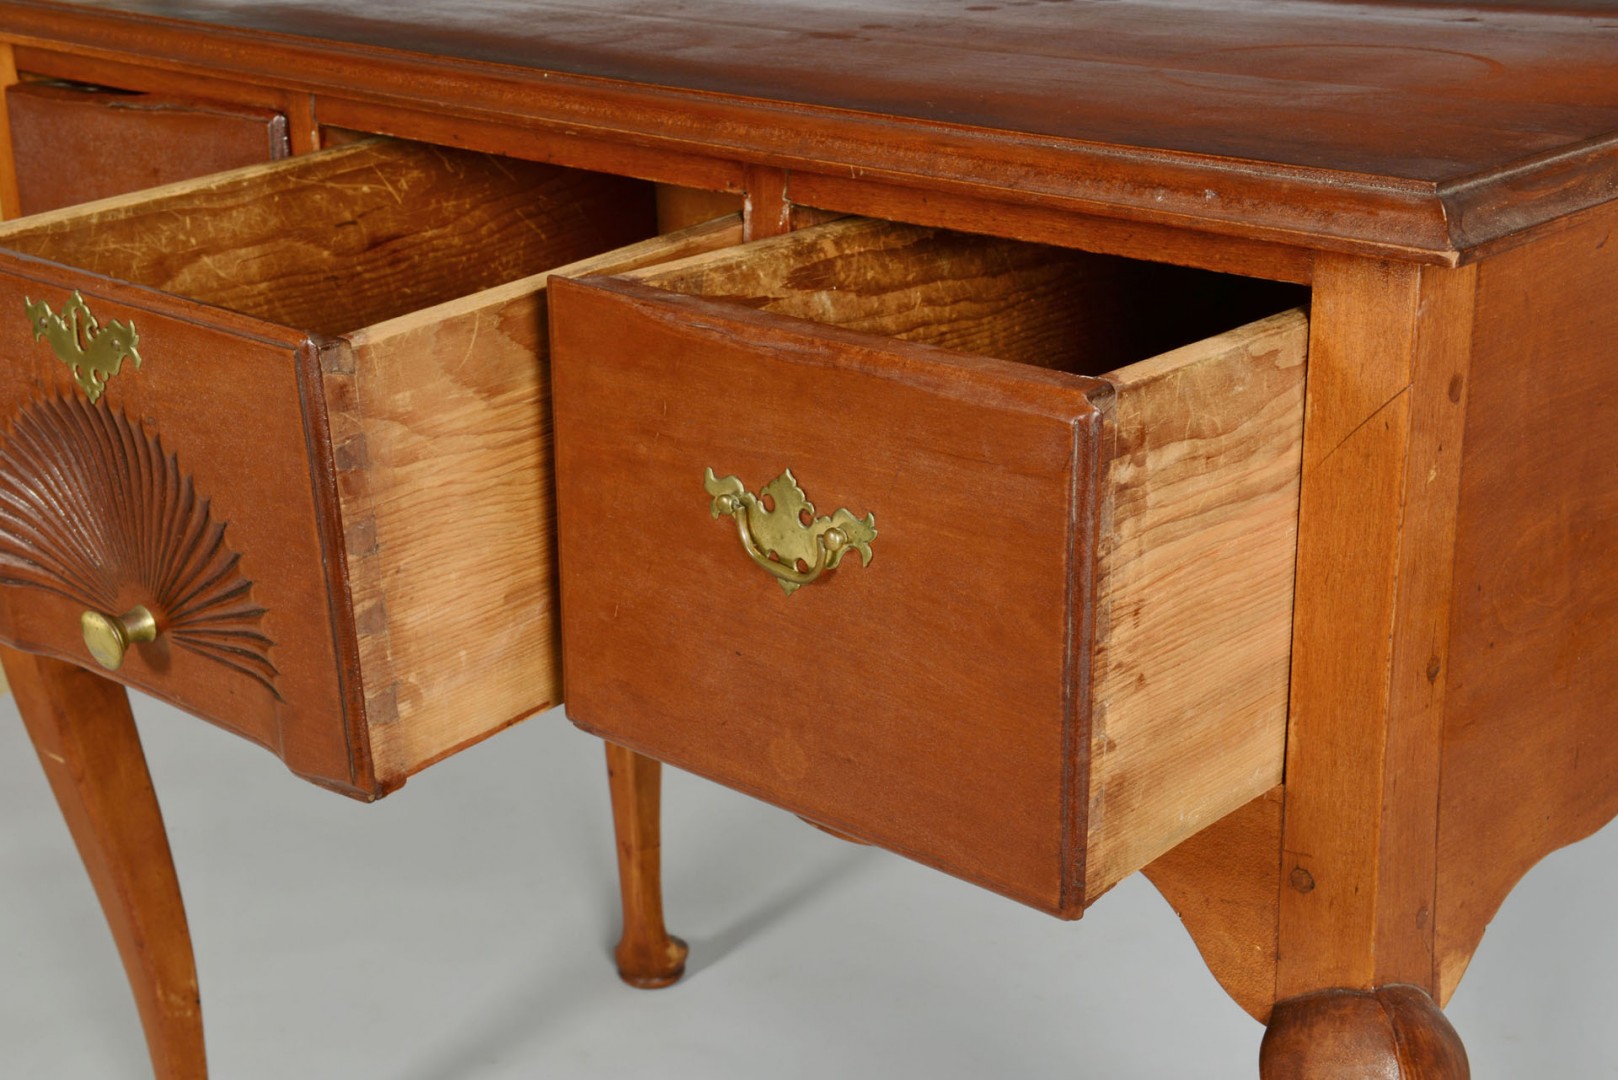 Lot 340: 18th century cherry lowboy or dressing table